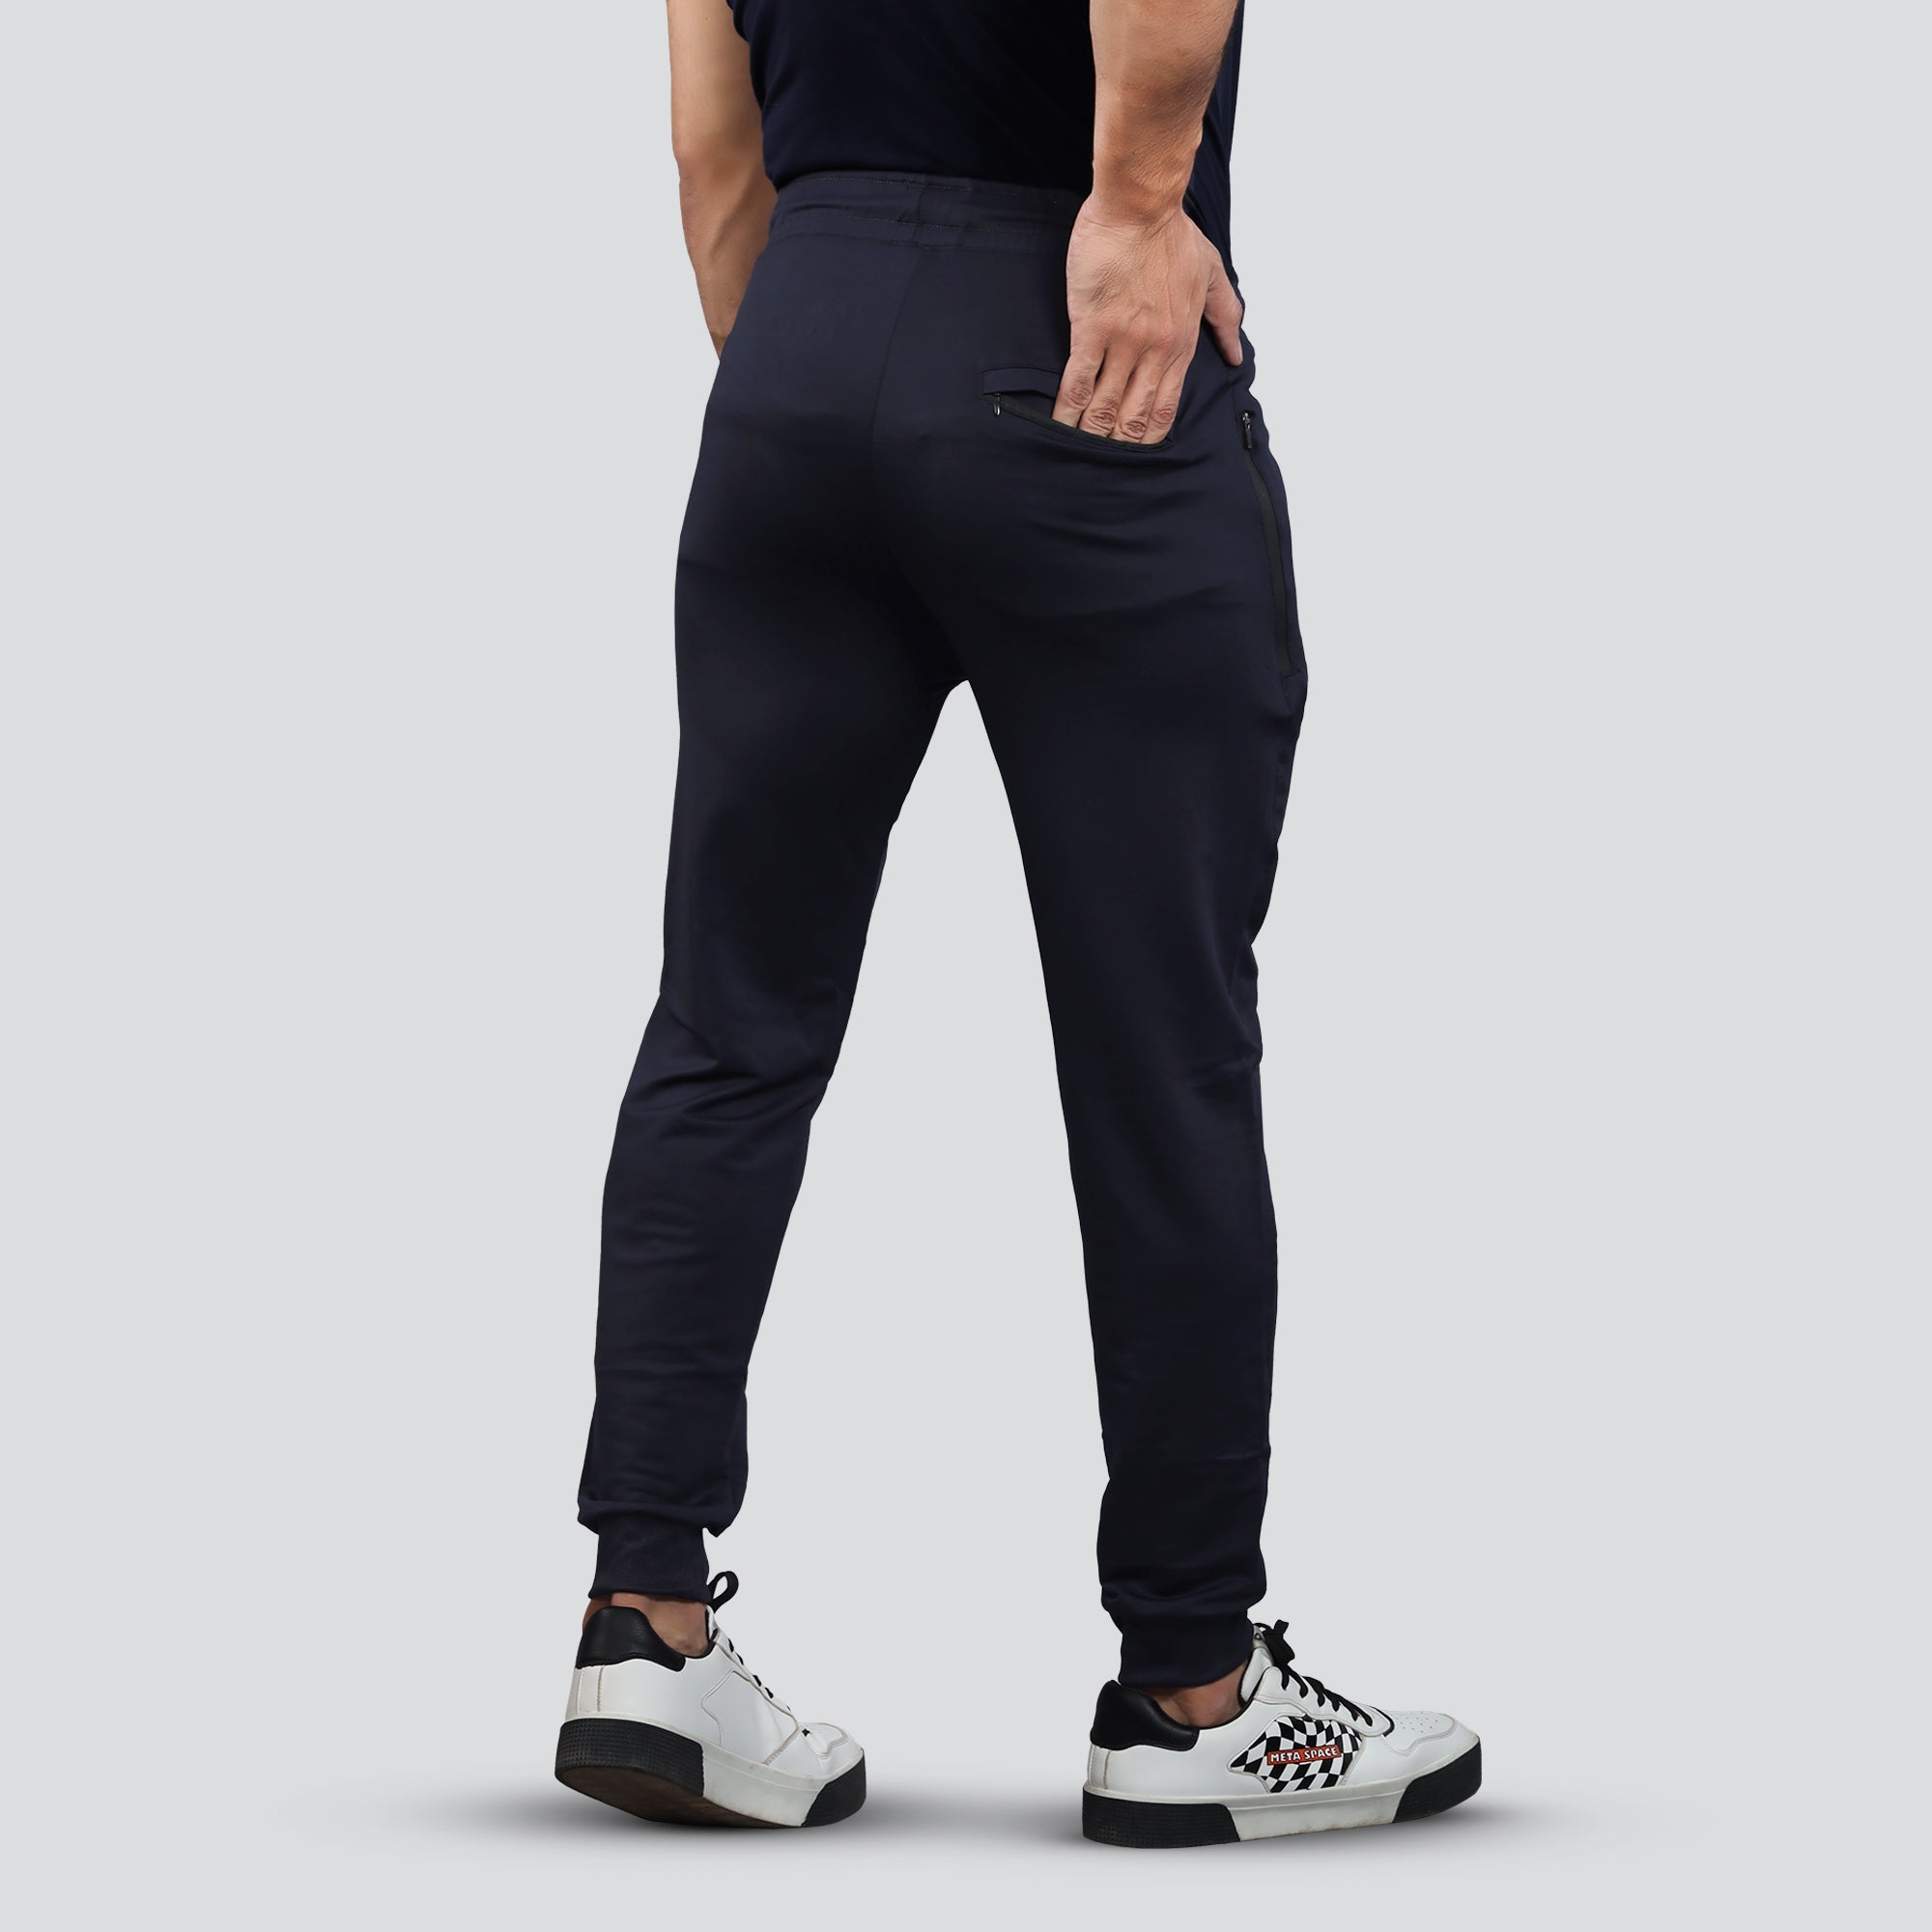 Men's Joggers Workout Athletic Pants for Gym - Navy Blue - Medium / Navy  Blue